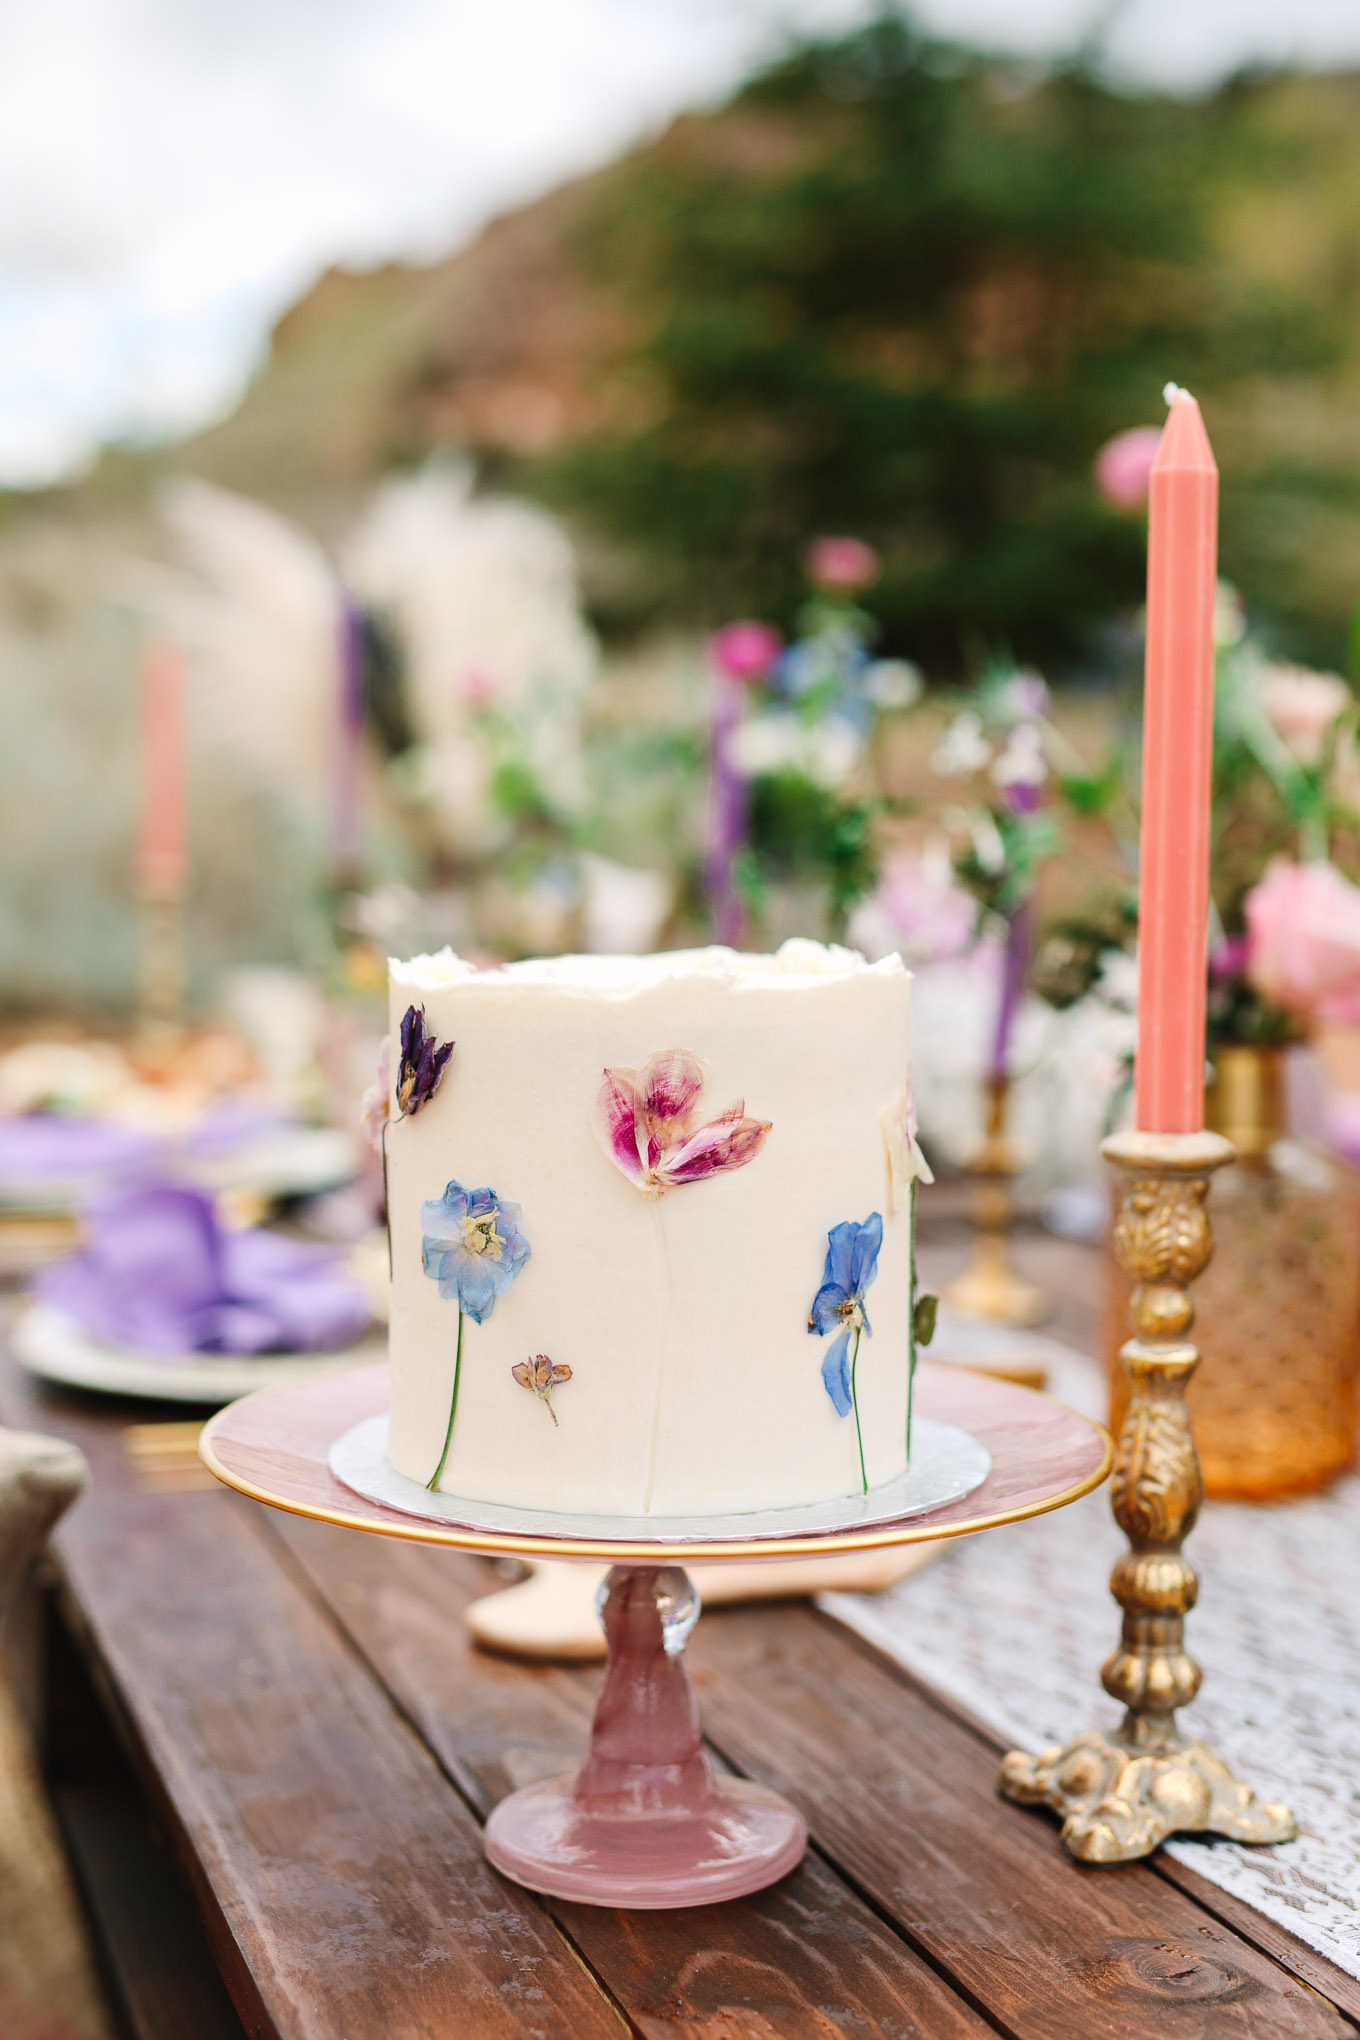 Pressed flower cake at Purple and jewel tone picnic setup | Zion National Park elopement | Colorful adventure elopement photography | #utahelopement #zionelopement #zionwedding #undercanvaszion #picnicwedding  Source: Mary Costa Photography | Los Angeles